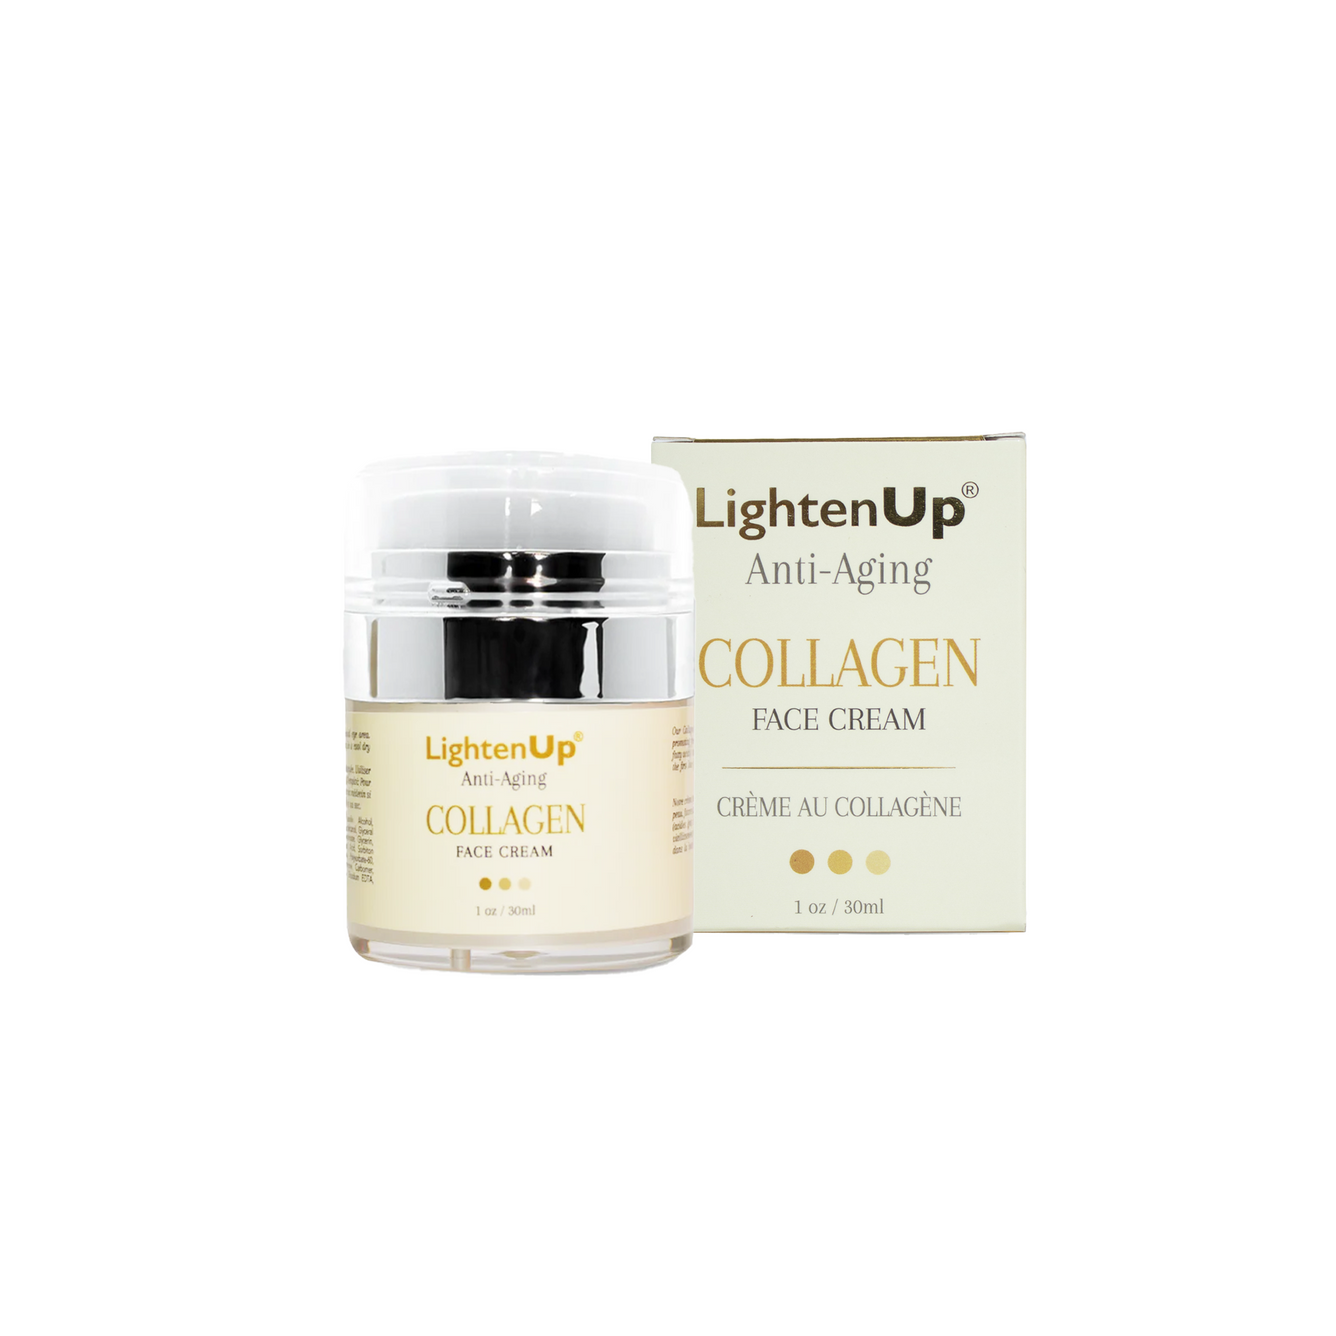 LightenUp Anti-Aging Collagen Face Cream 30ml Mitchell Brands - Mitchell Brands - Skin Lightening, Skin Brightening, Fade Dark Spots, Shea Butter, Hair Growth Products